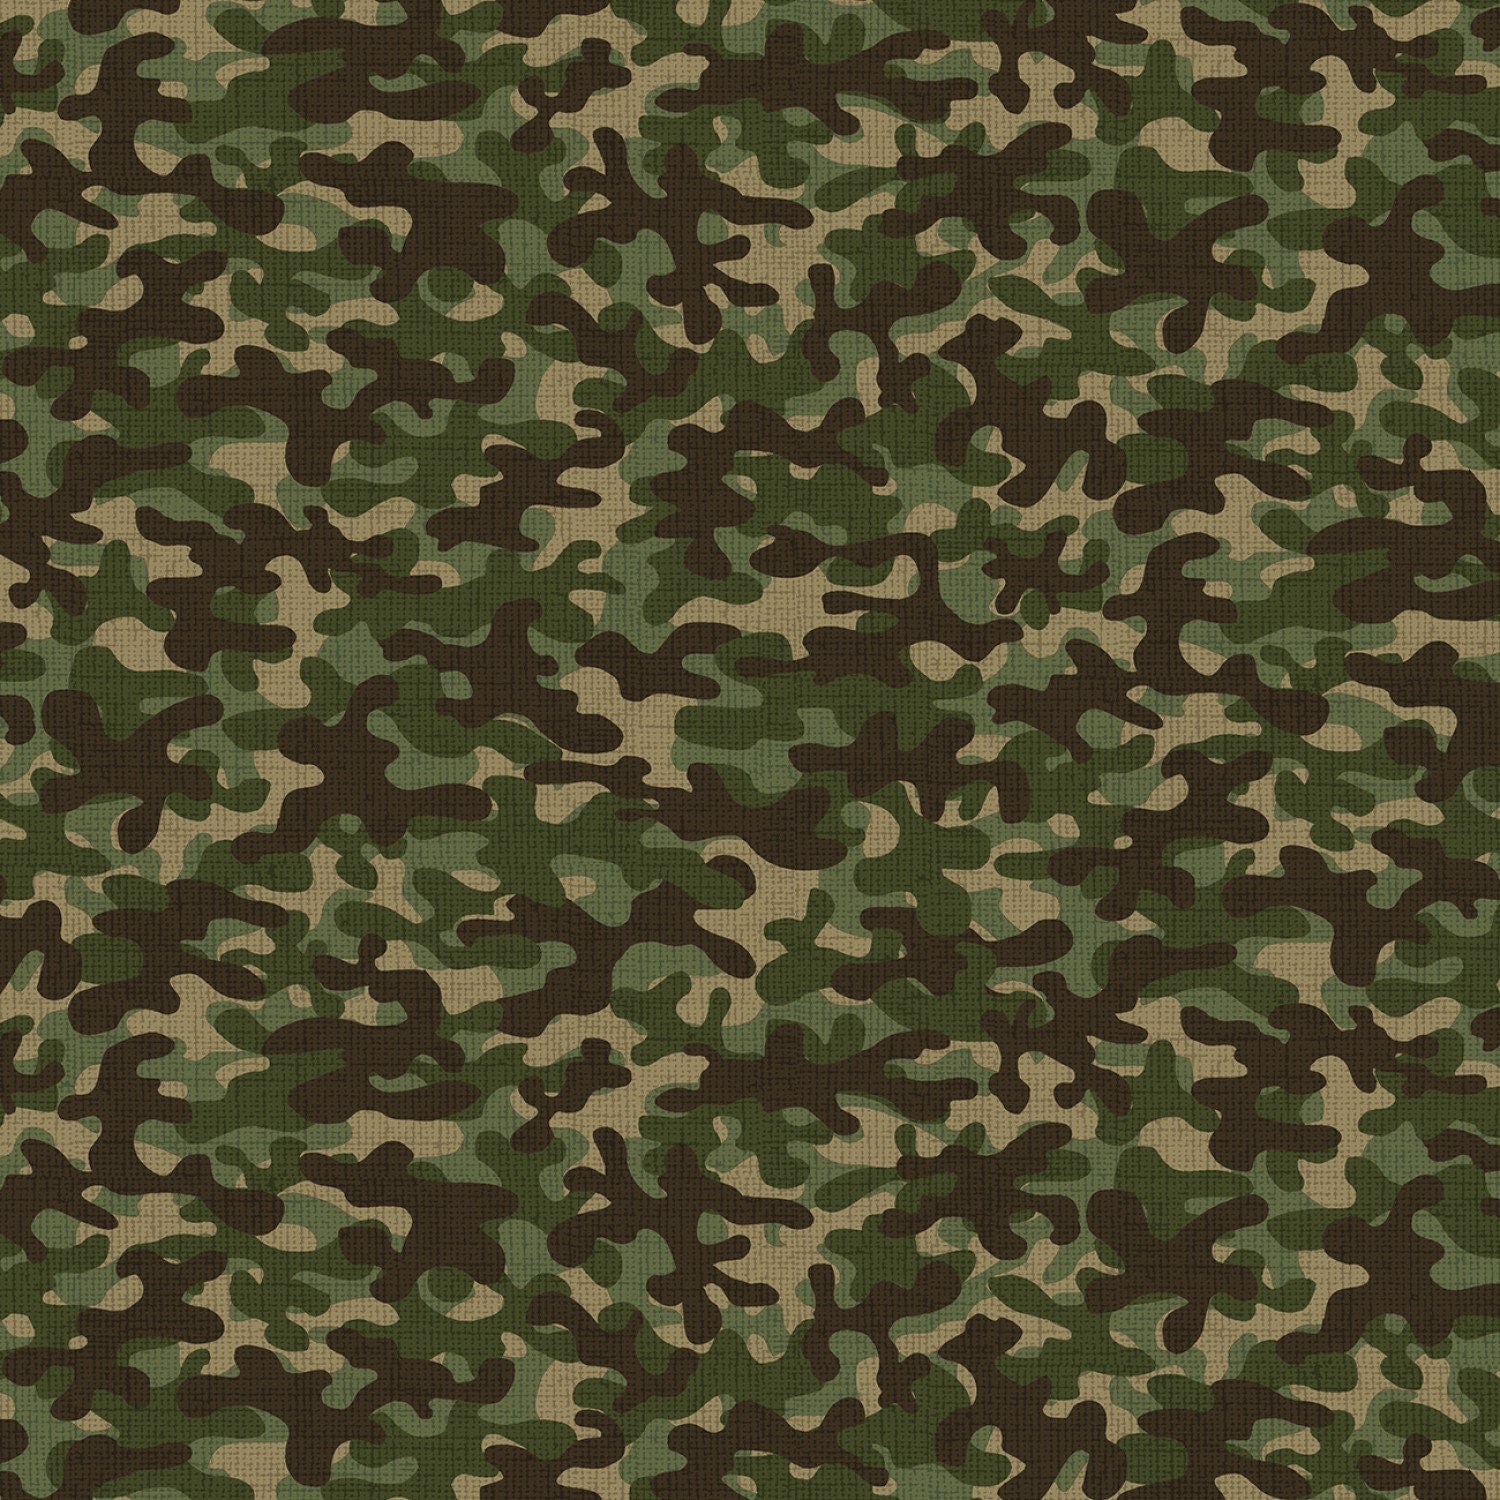 Camo - Camo Blender Multi Green from Timeless Treasures Fabric